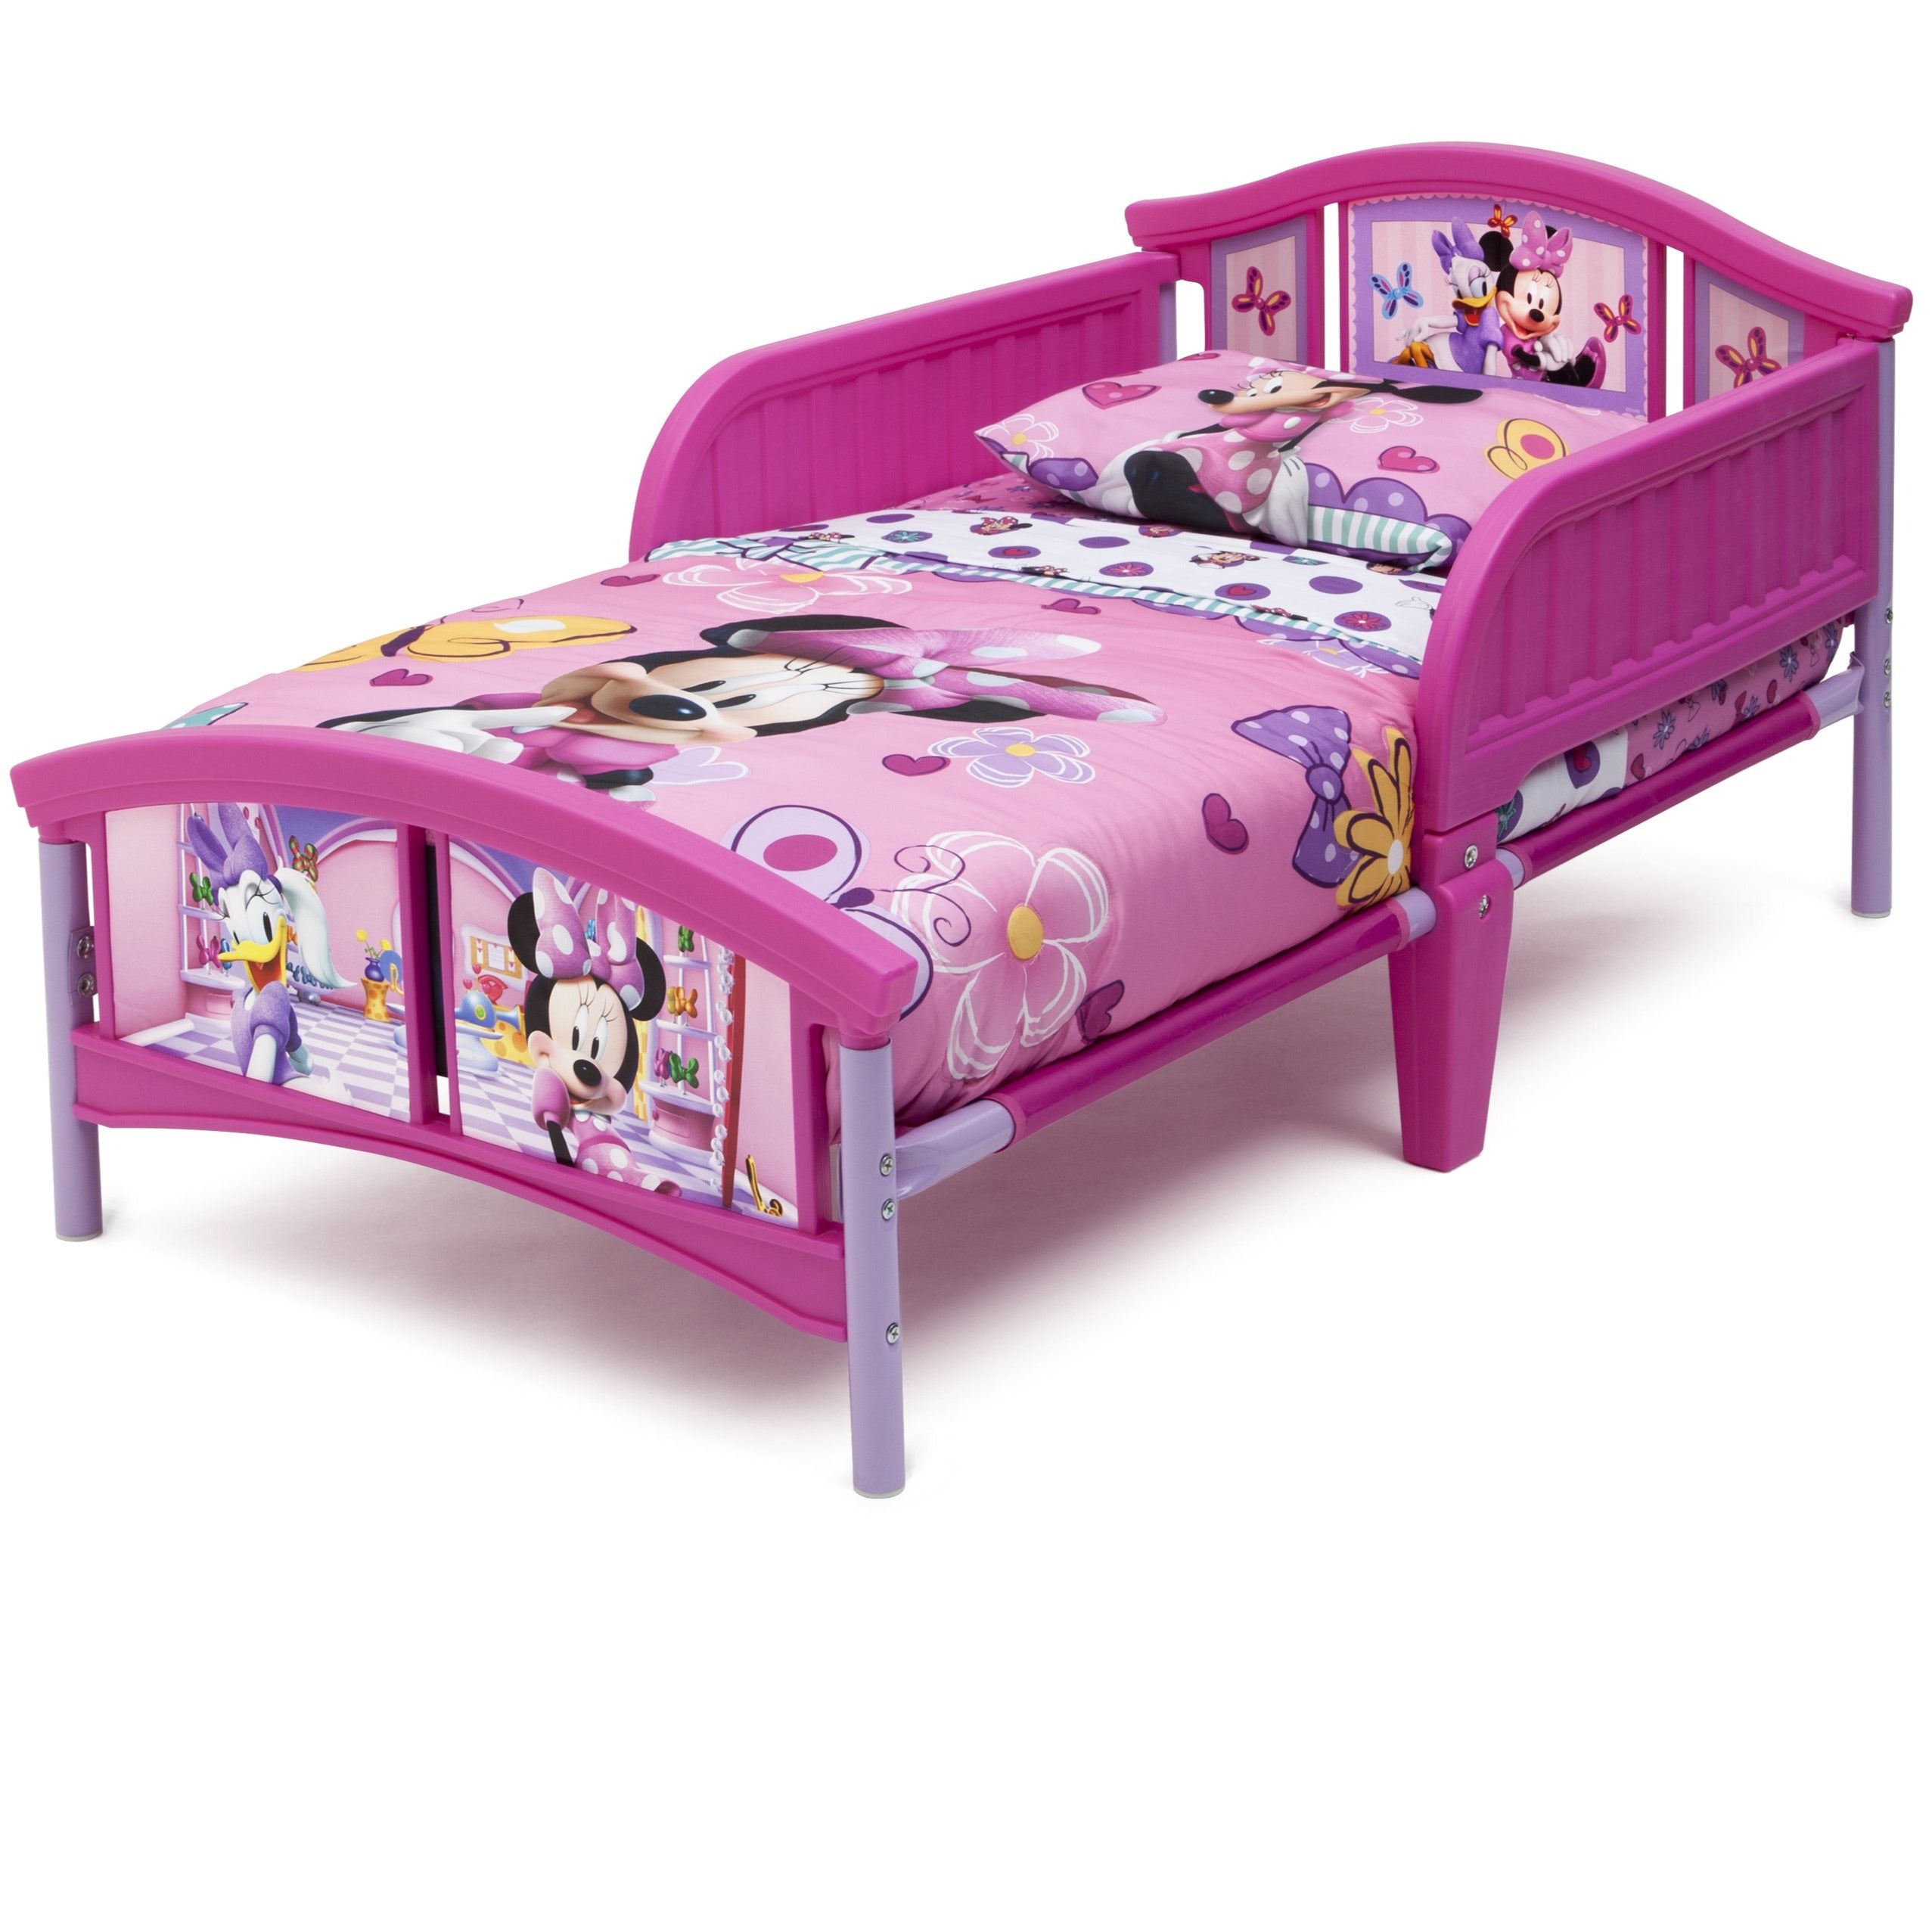 Minnie Mouse Plastic And Metal Toddler Bed